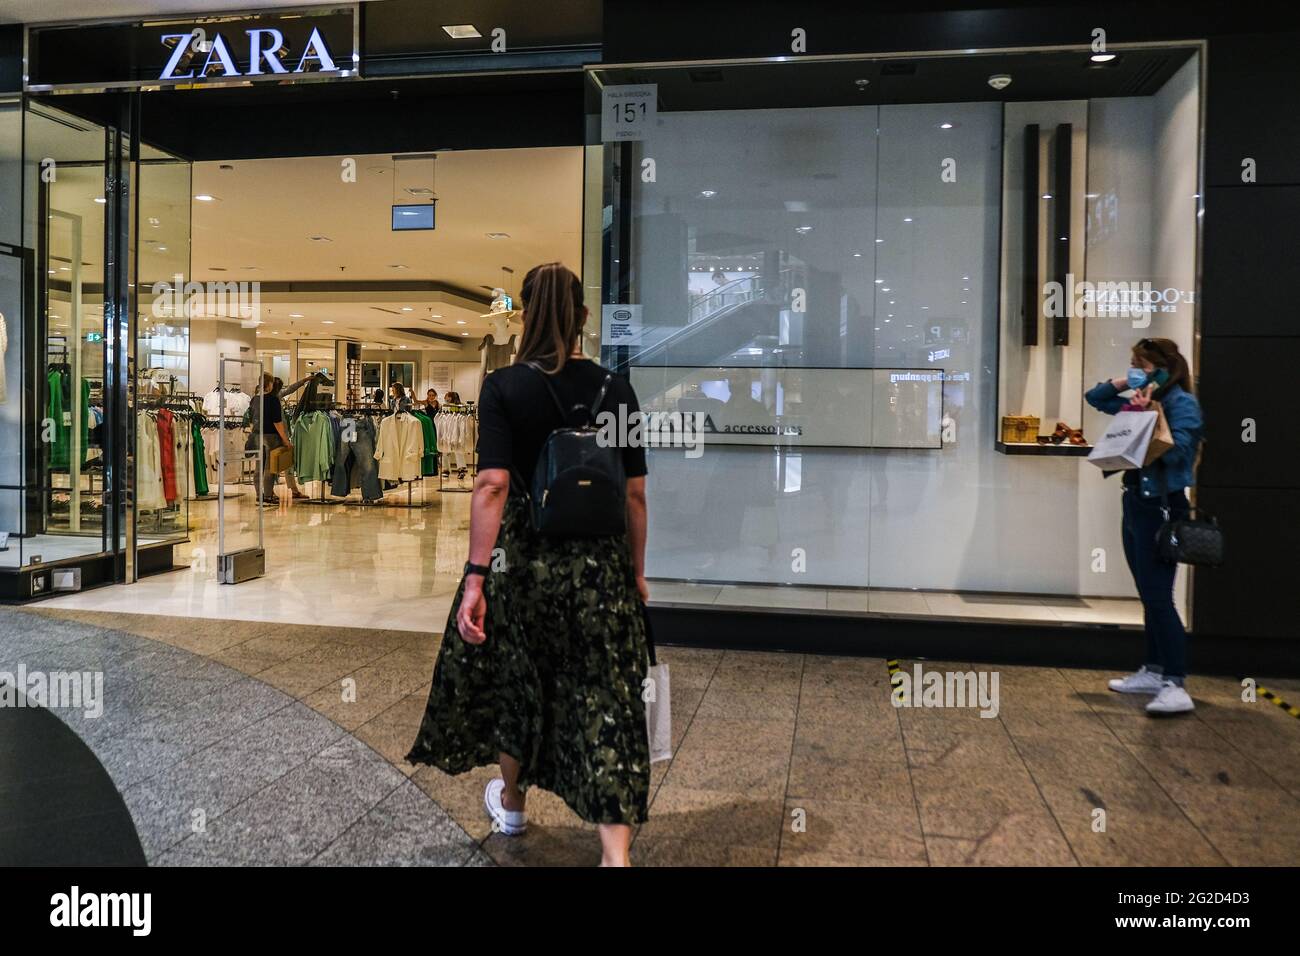 Zara Shop Inside High Resolution Stock Photography and Images - Alamy